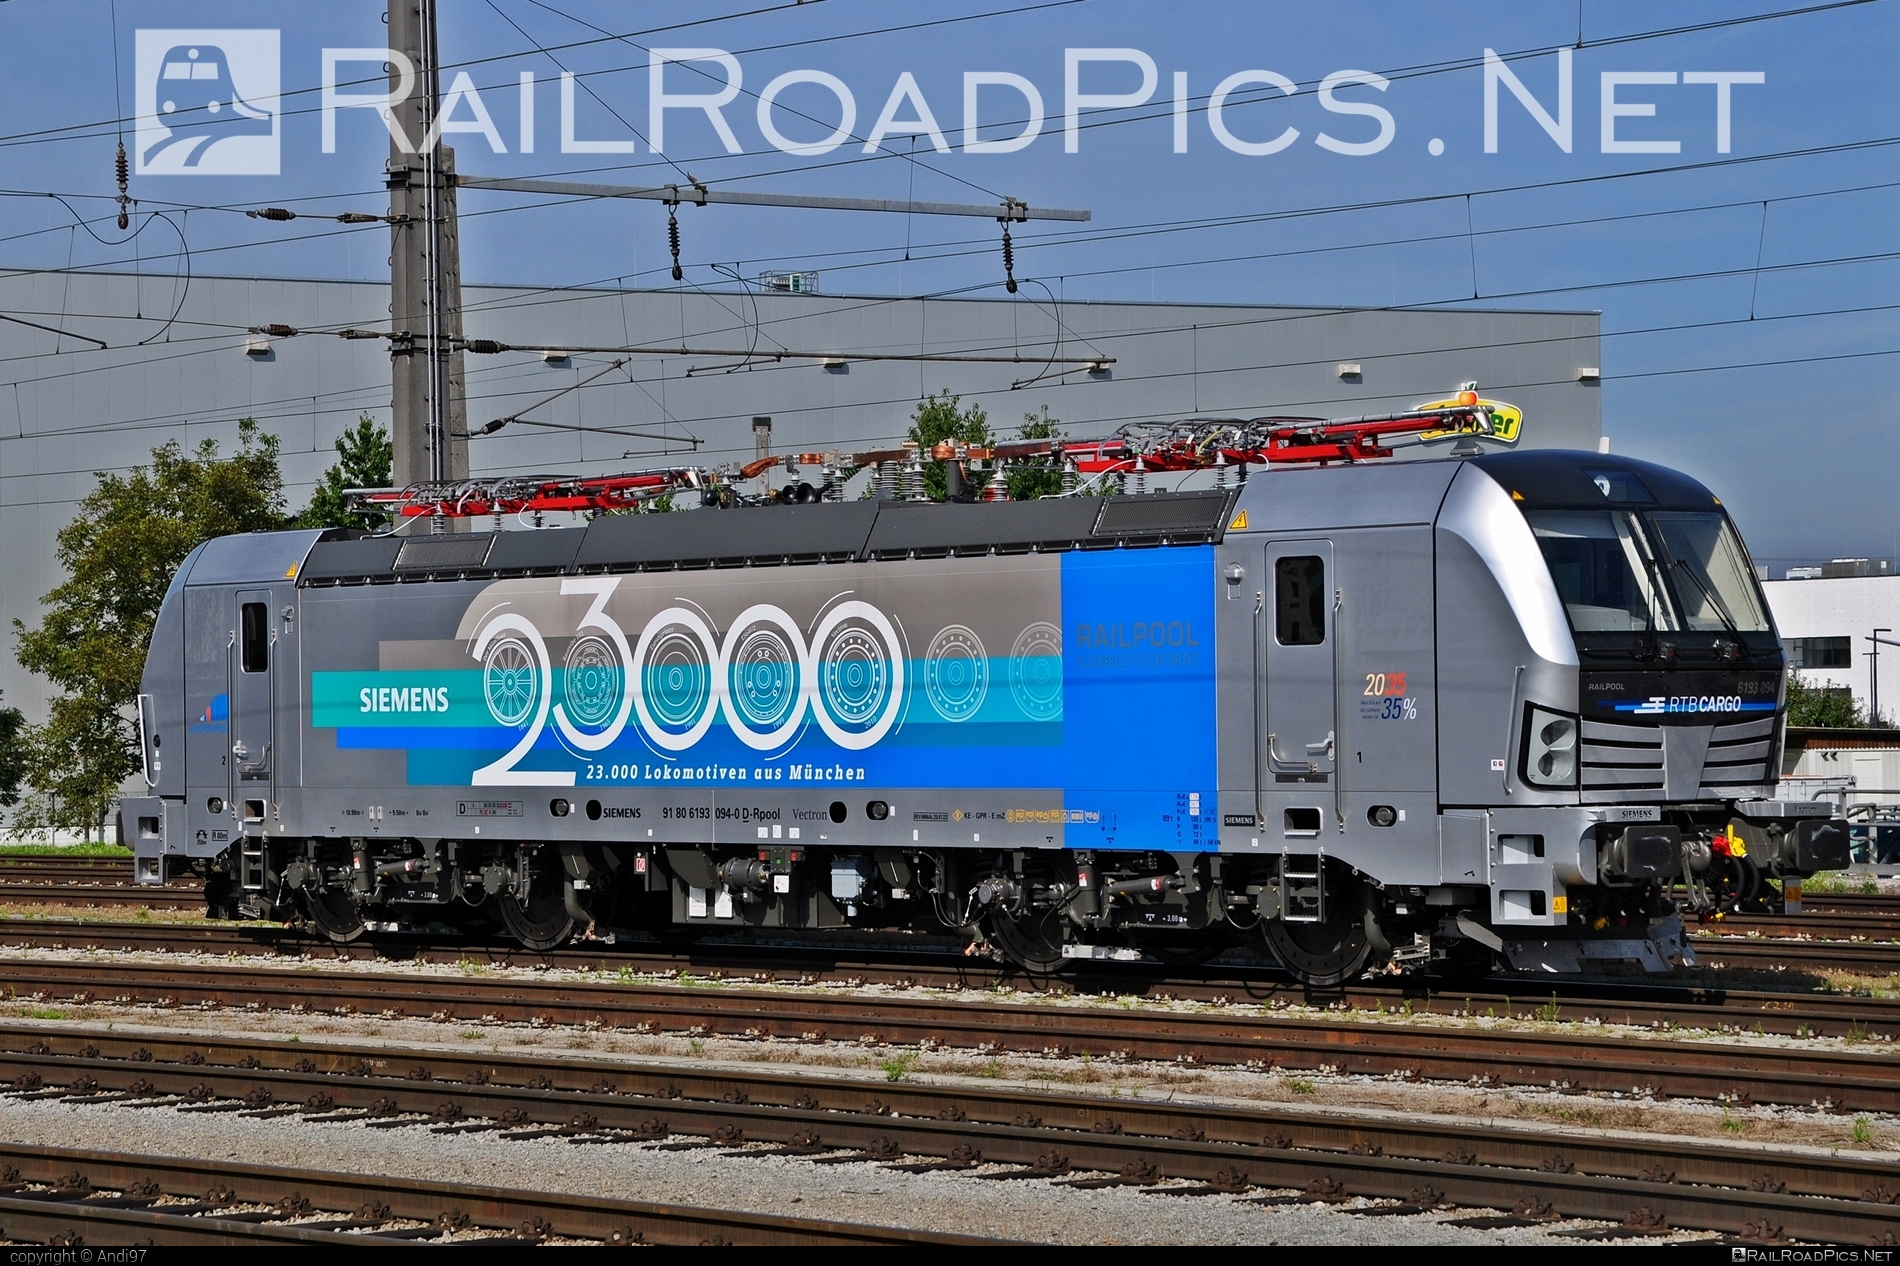 Siemens Vectron MS - 6193 094 operated by RTB Cargo GmbH #railpool #railpoolgmbh #rtb #rtbcargo #siemens #siemensVectron #siemensVectronMS #vectron #vectronMS